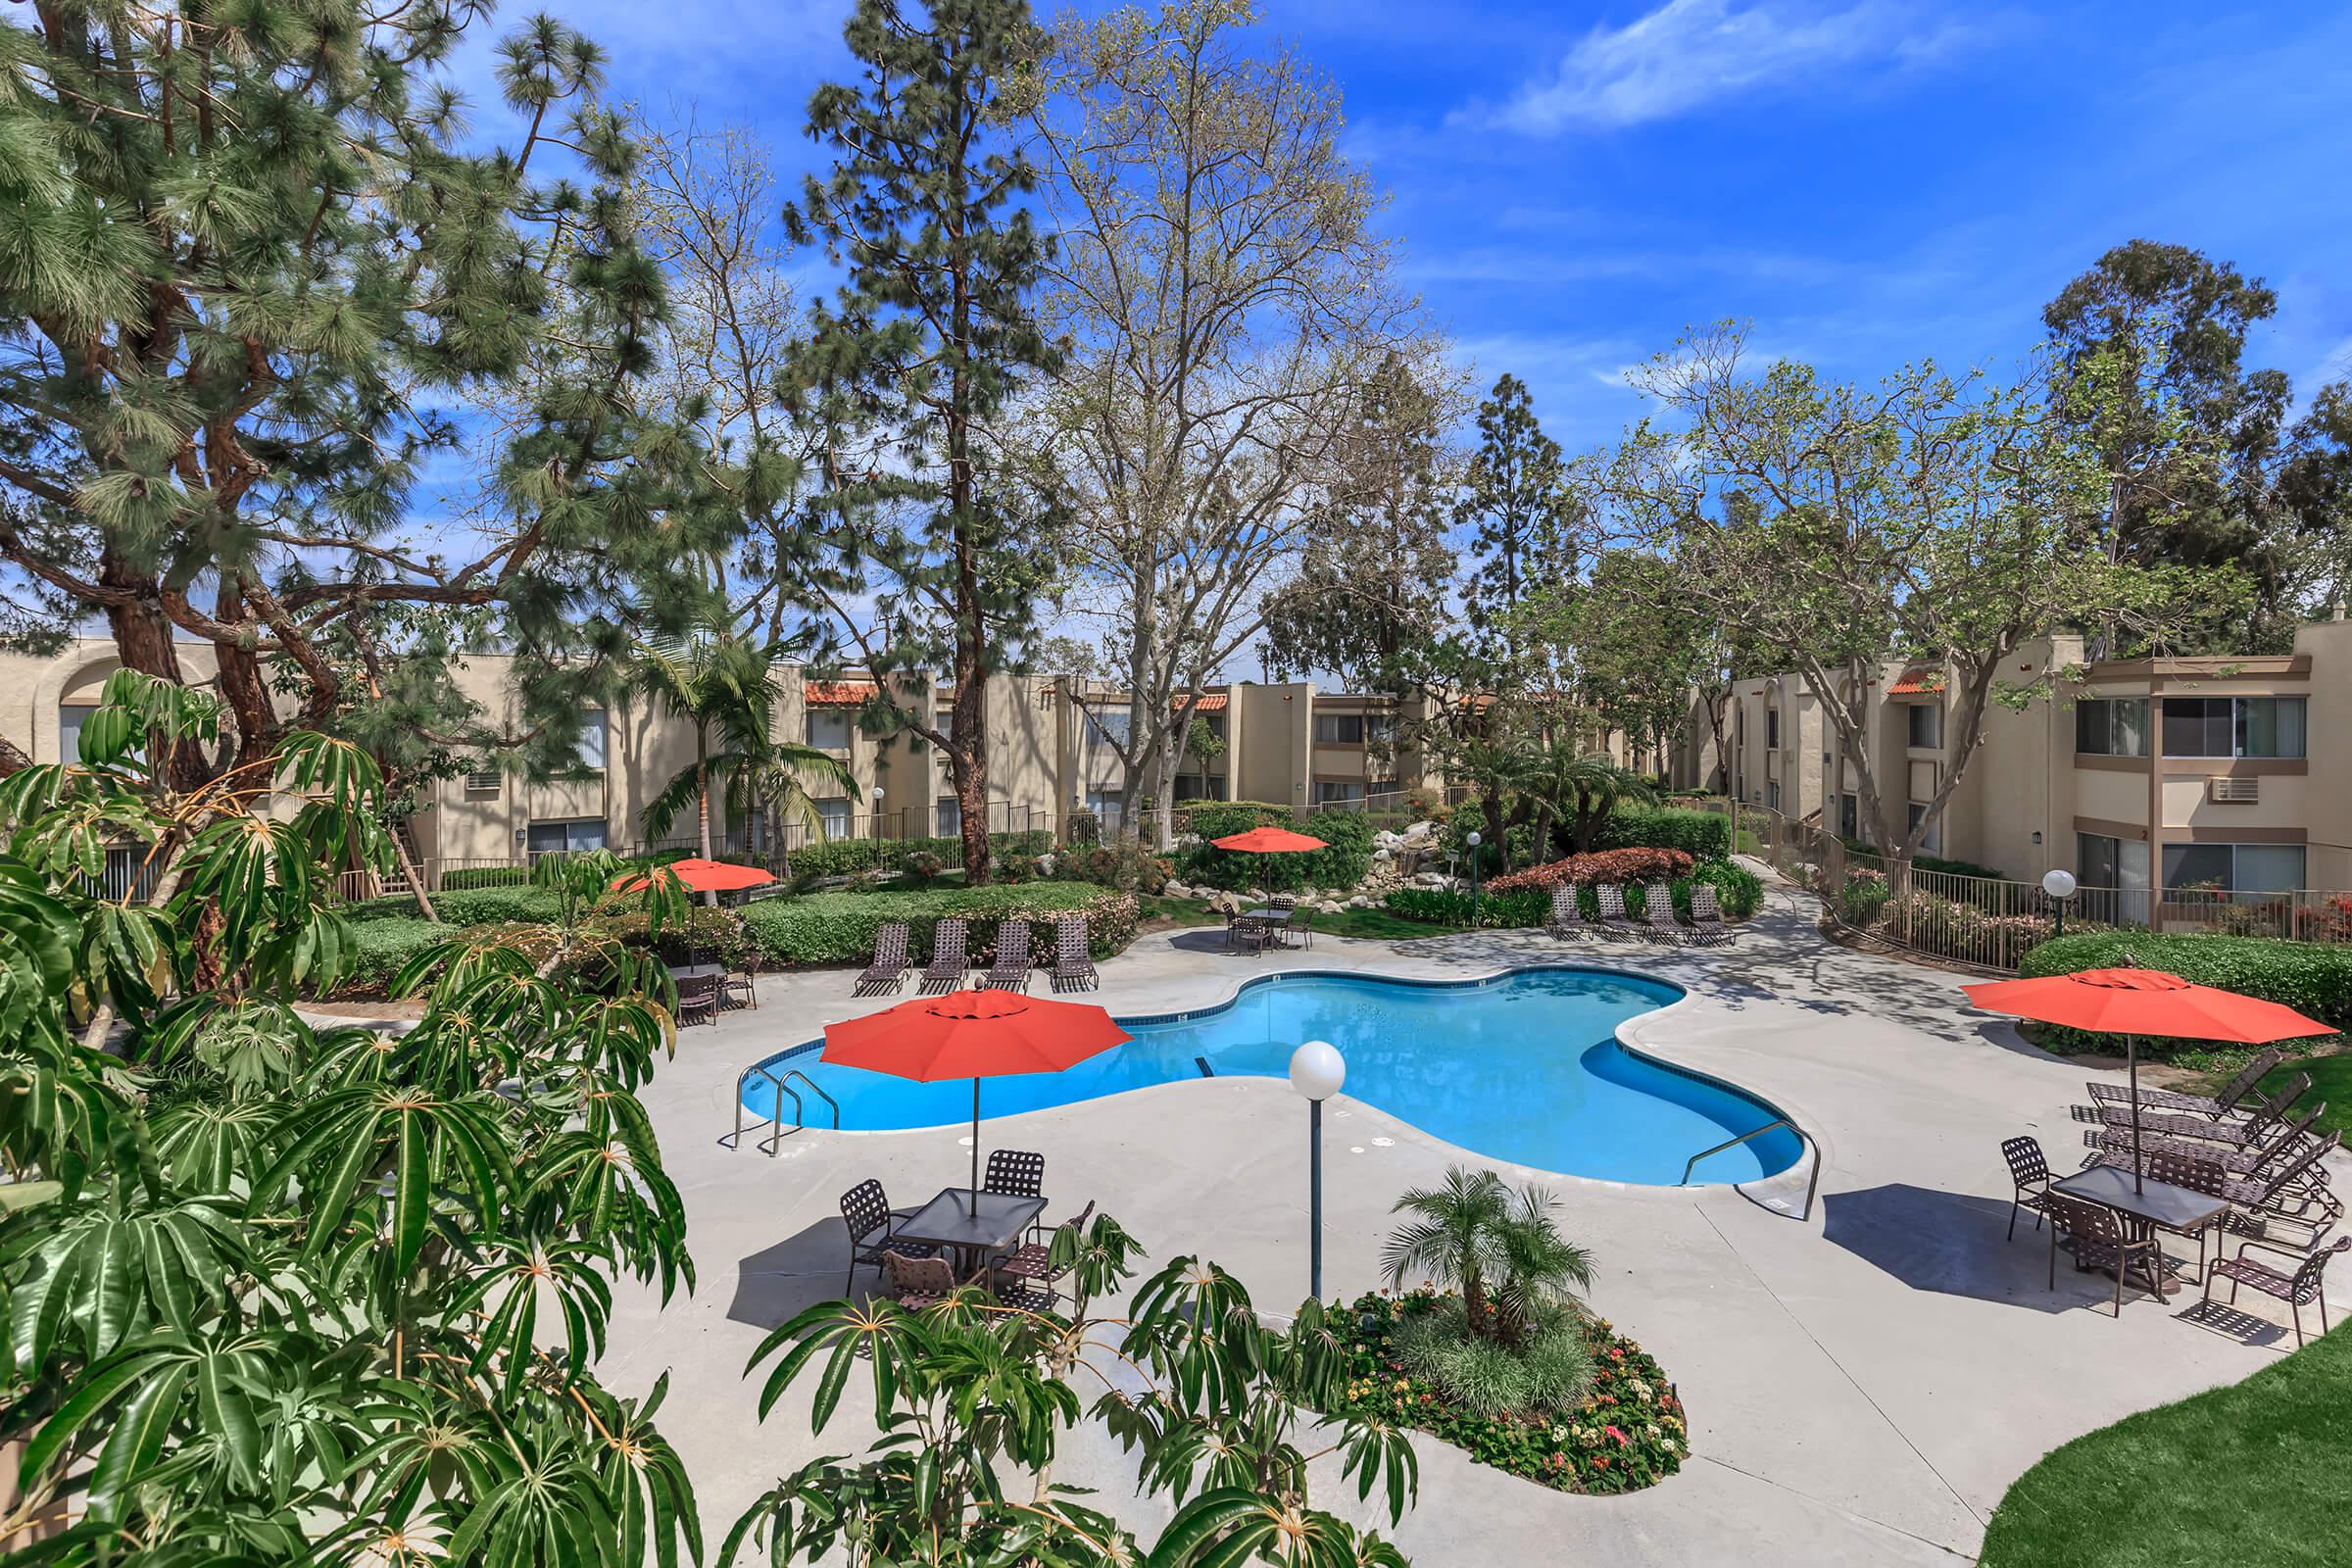 Pacific Woods Apartment Homes community pool with green trees